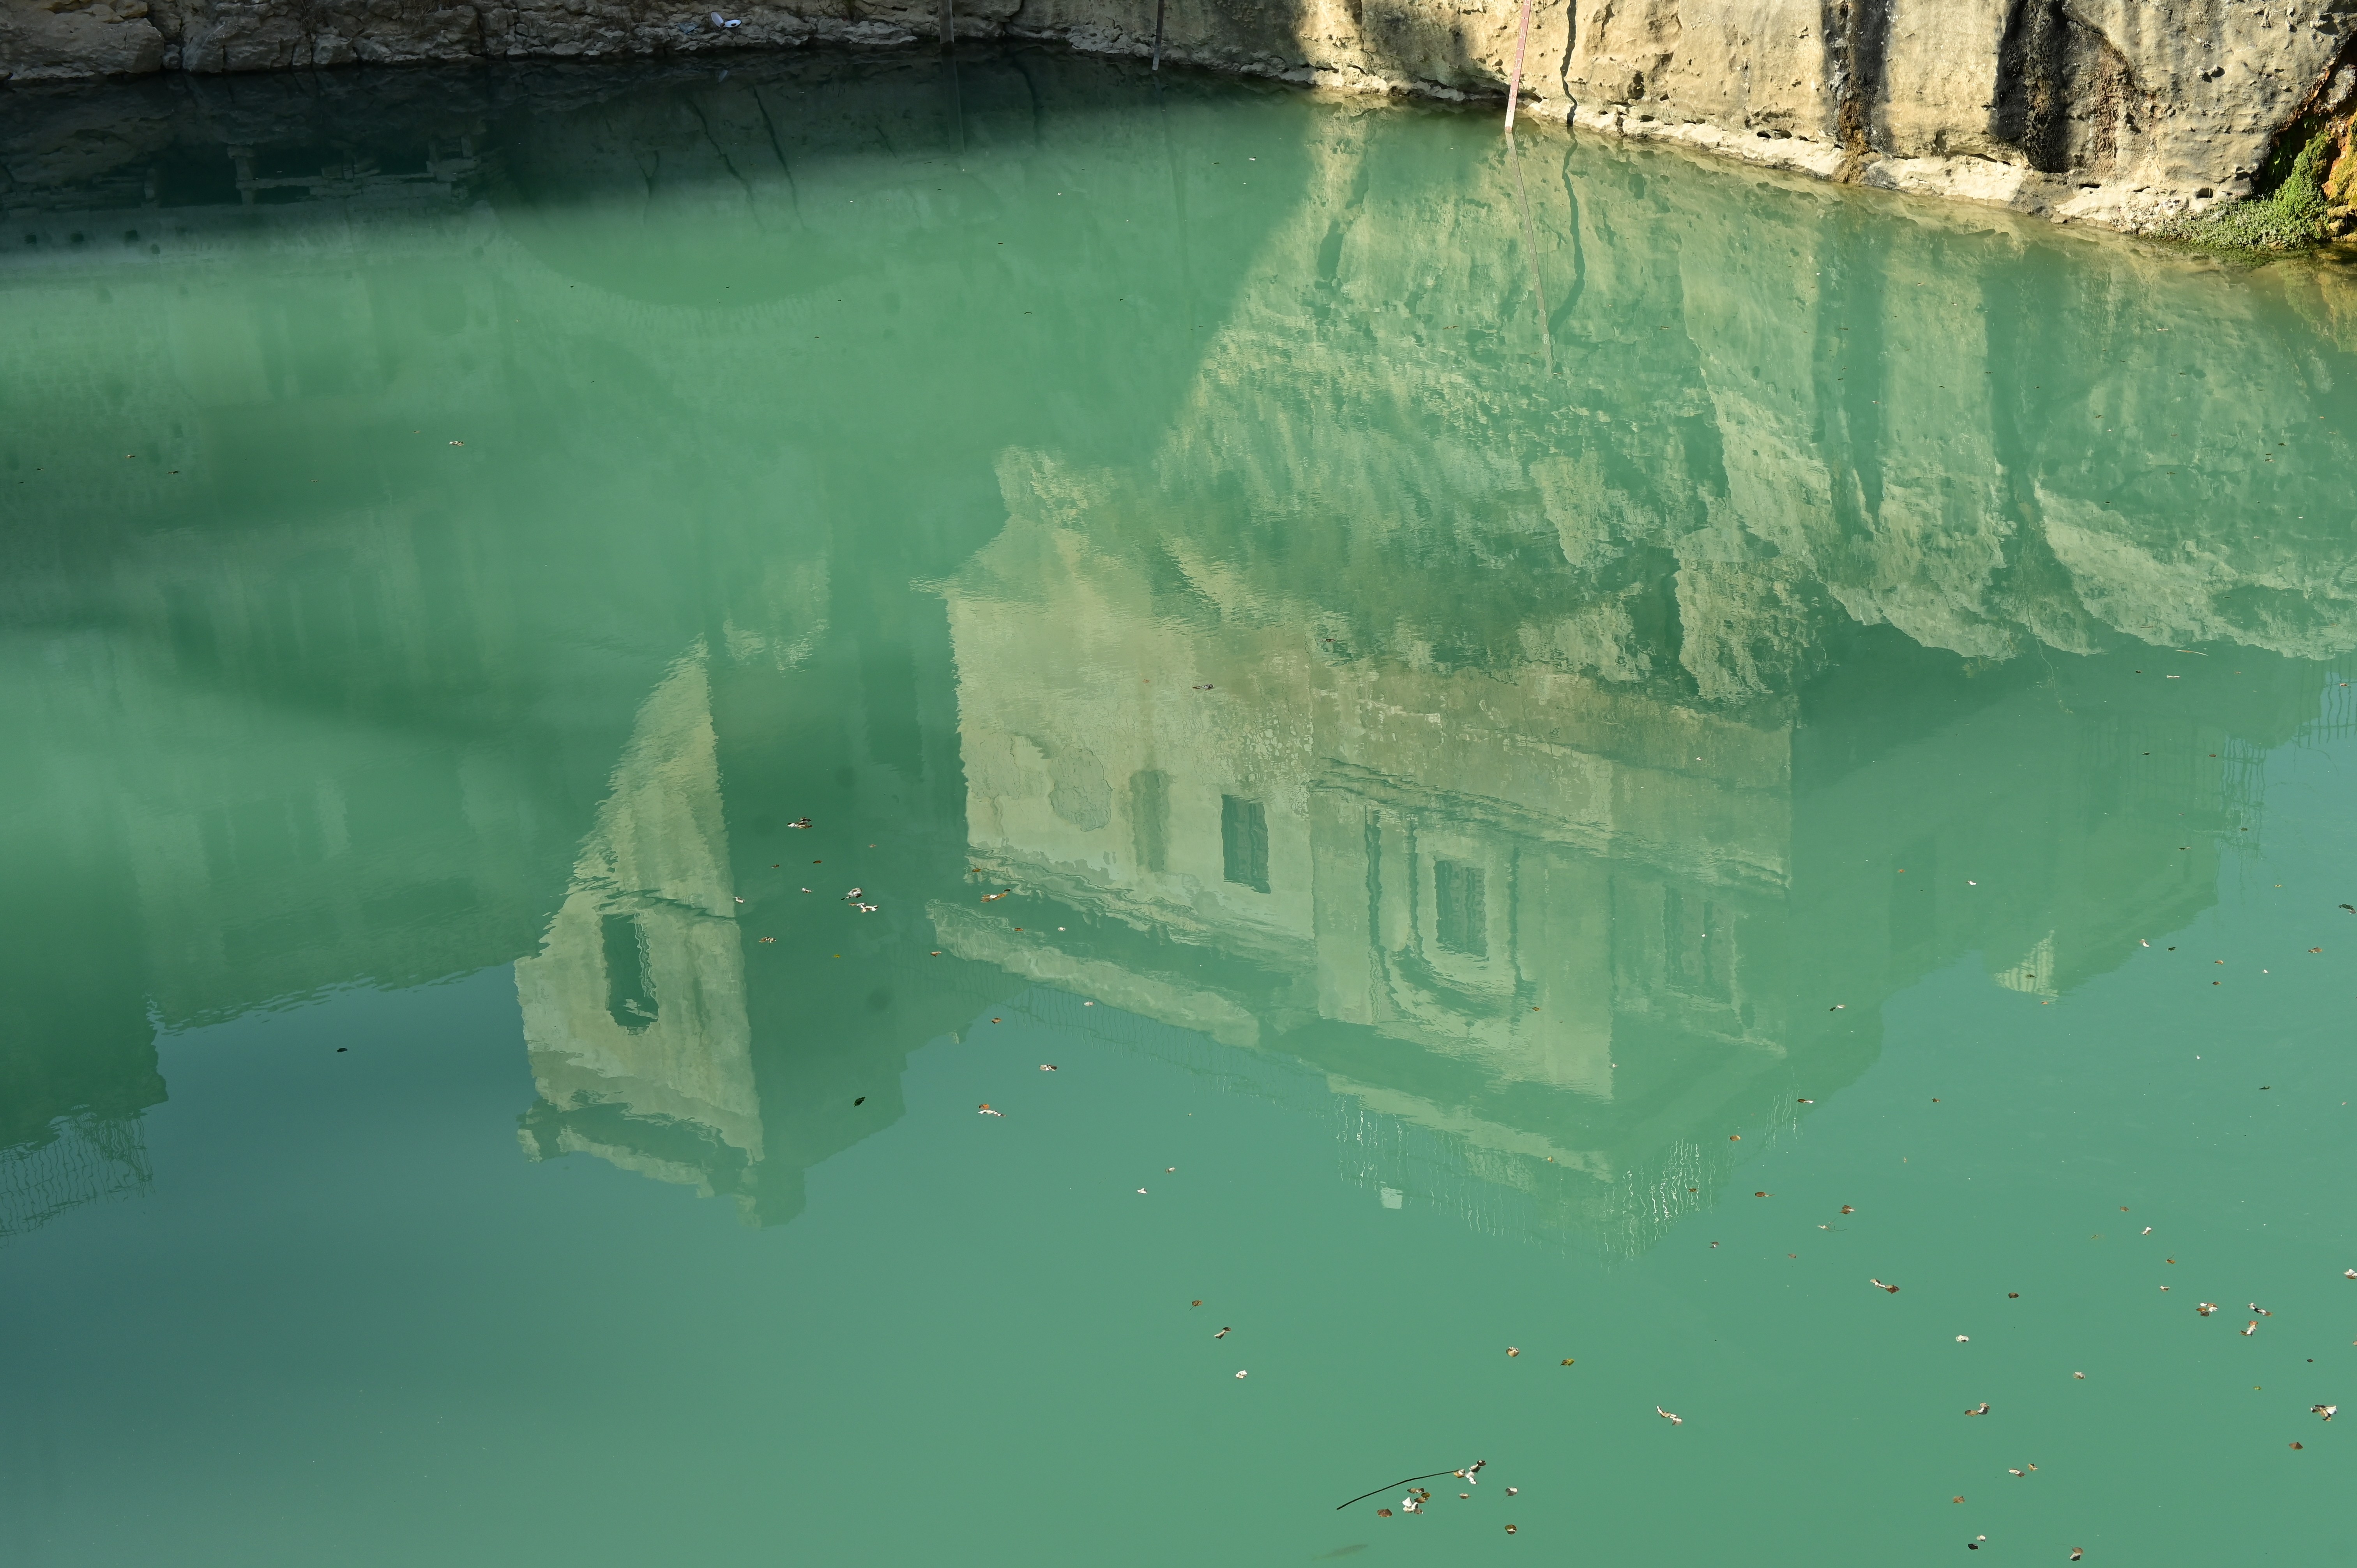 Water Woes at Katas Raj- according to hindu historians, they believe that after the death of his wife Sati, Lord Shiva cried so inconsolably that his tears formed a pond that came to be known